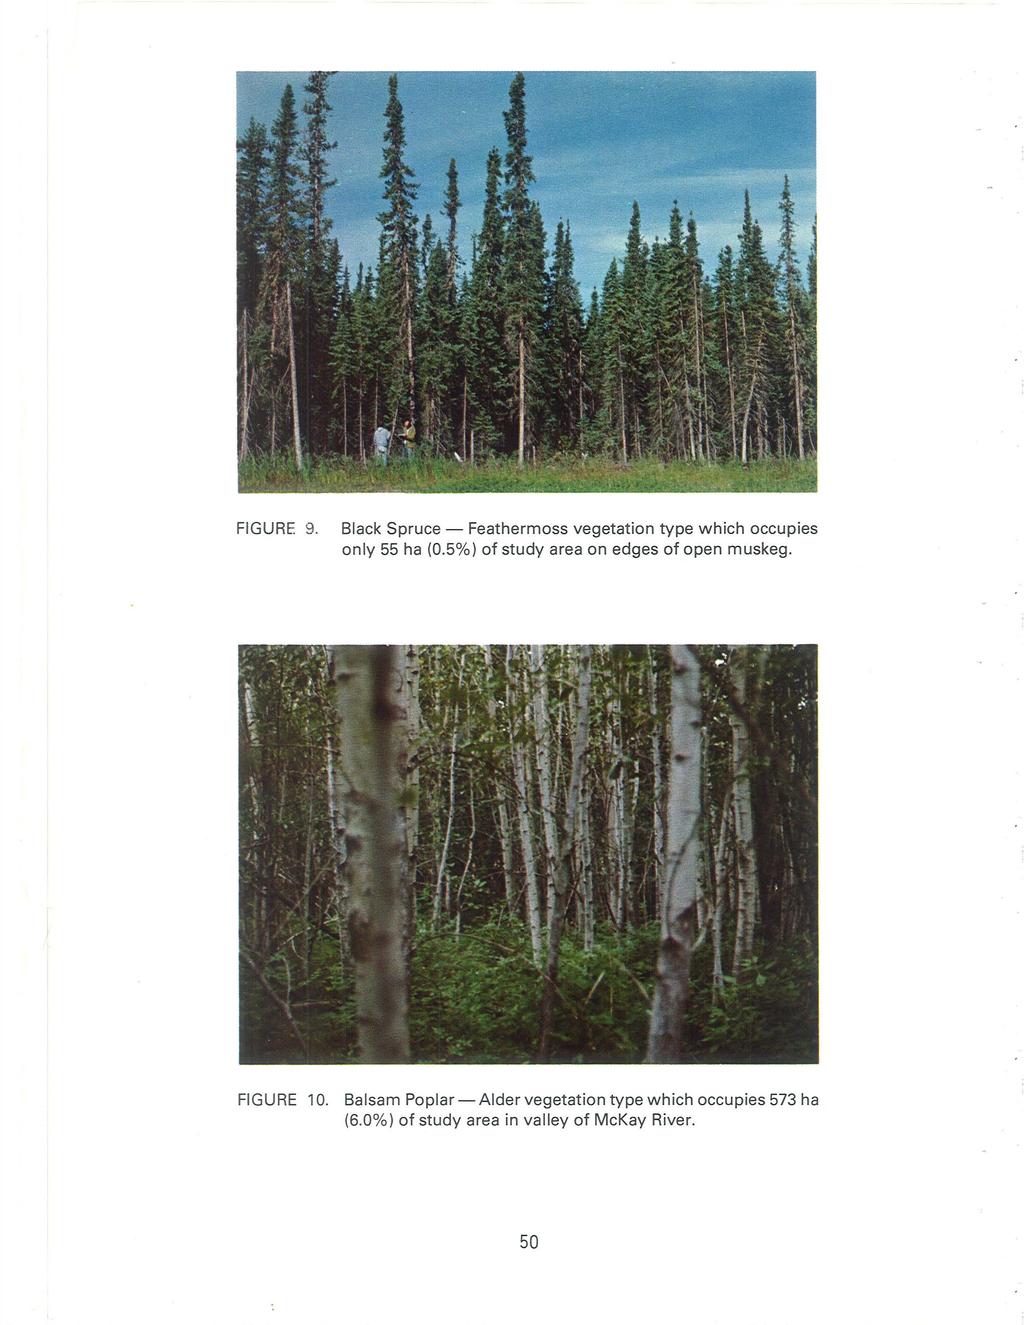 FIGURE 9. Black Spruce - Feathermoss vegetation type which occupies only 55 ha (0.